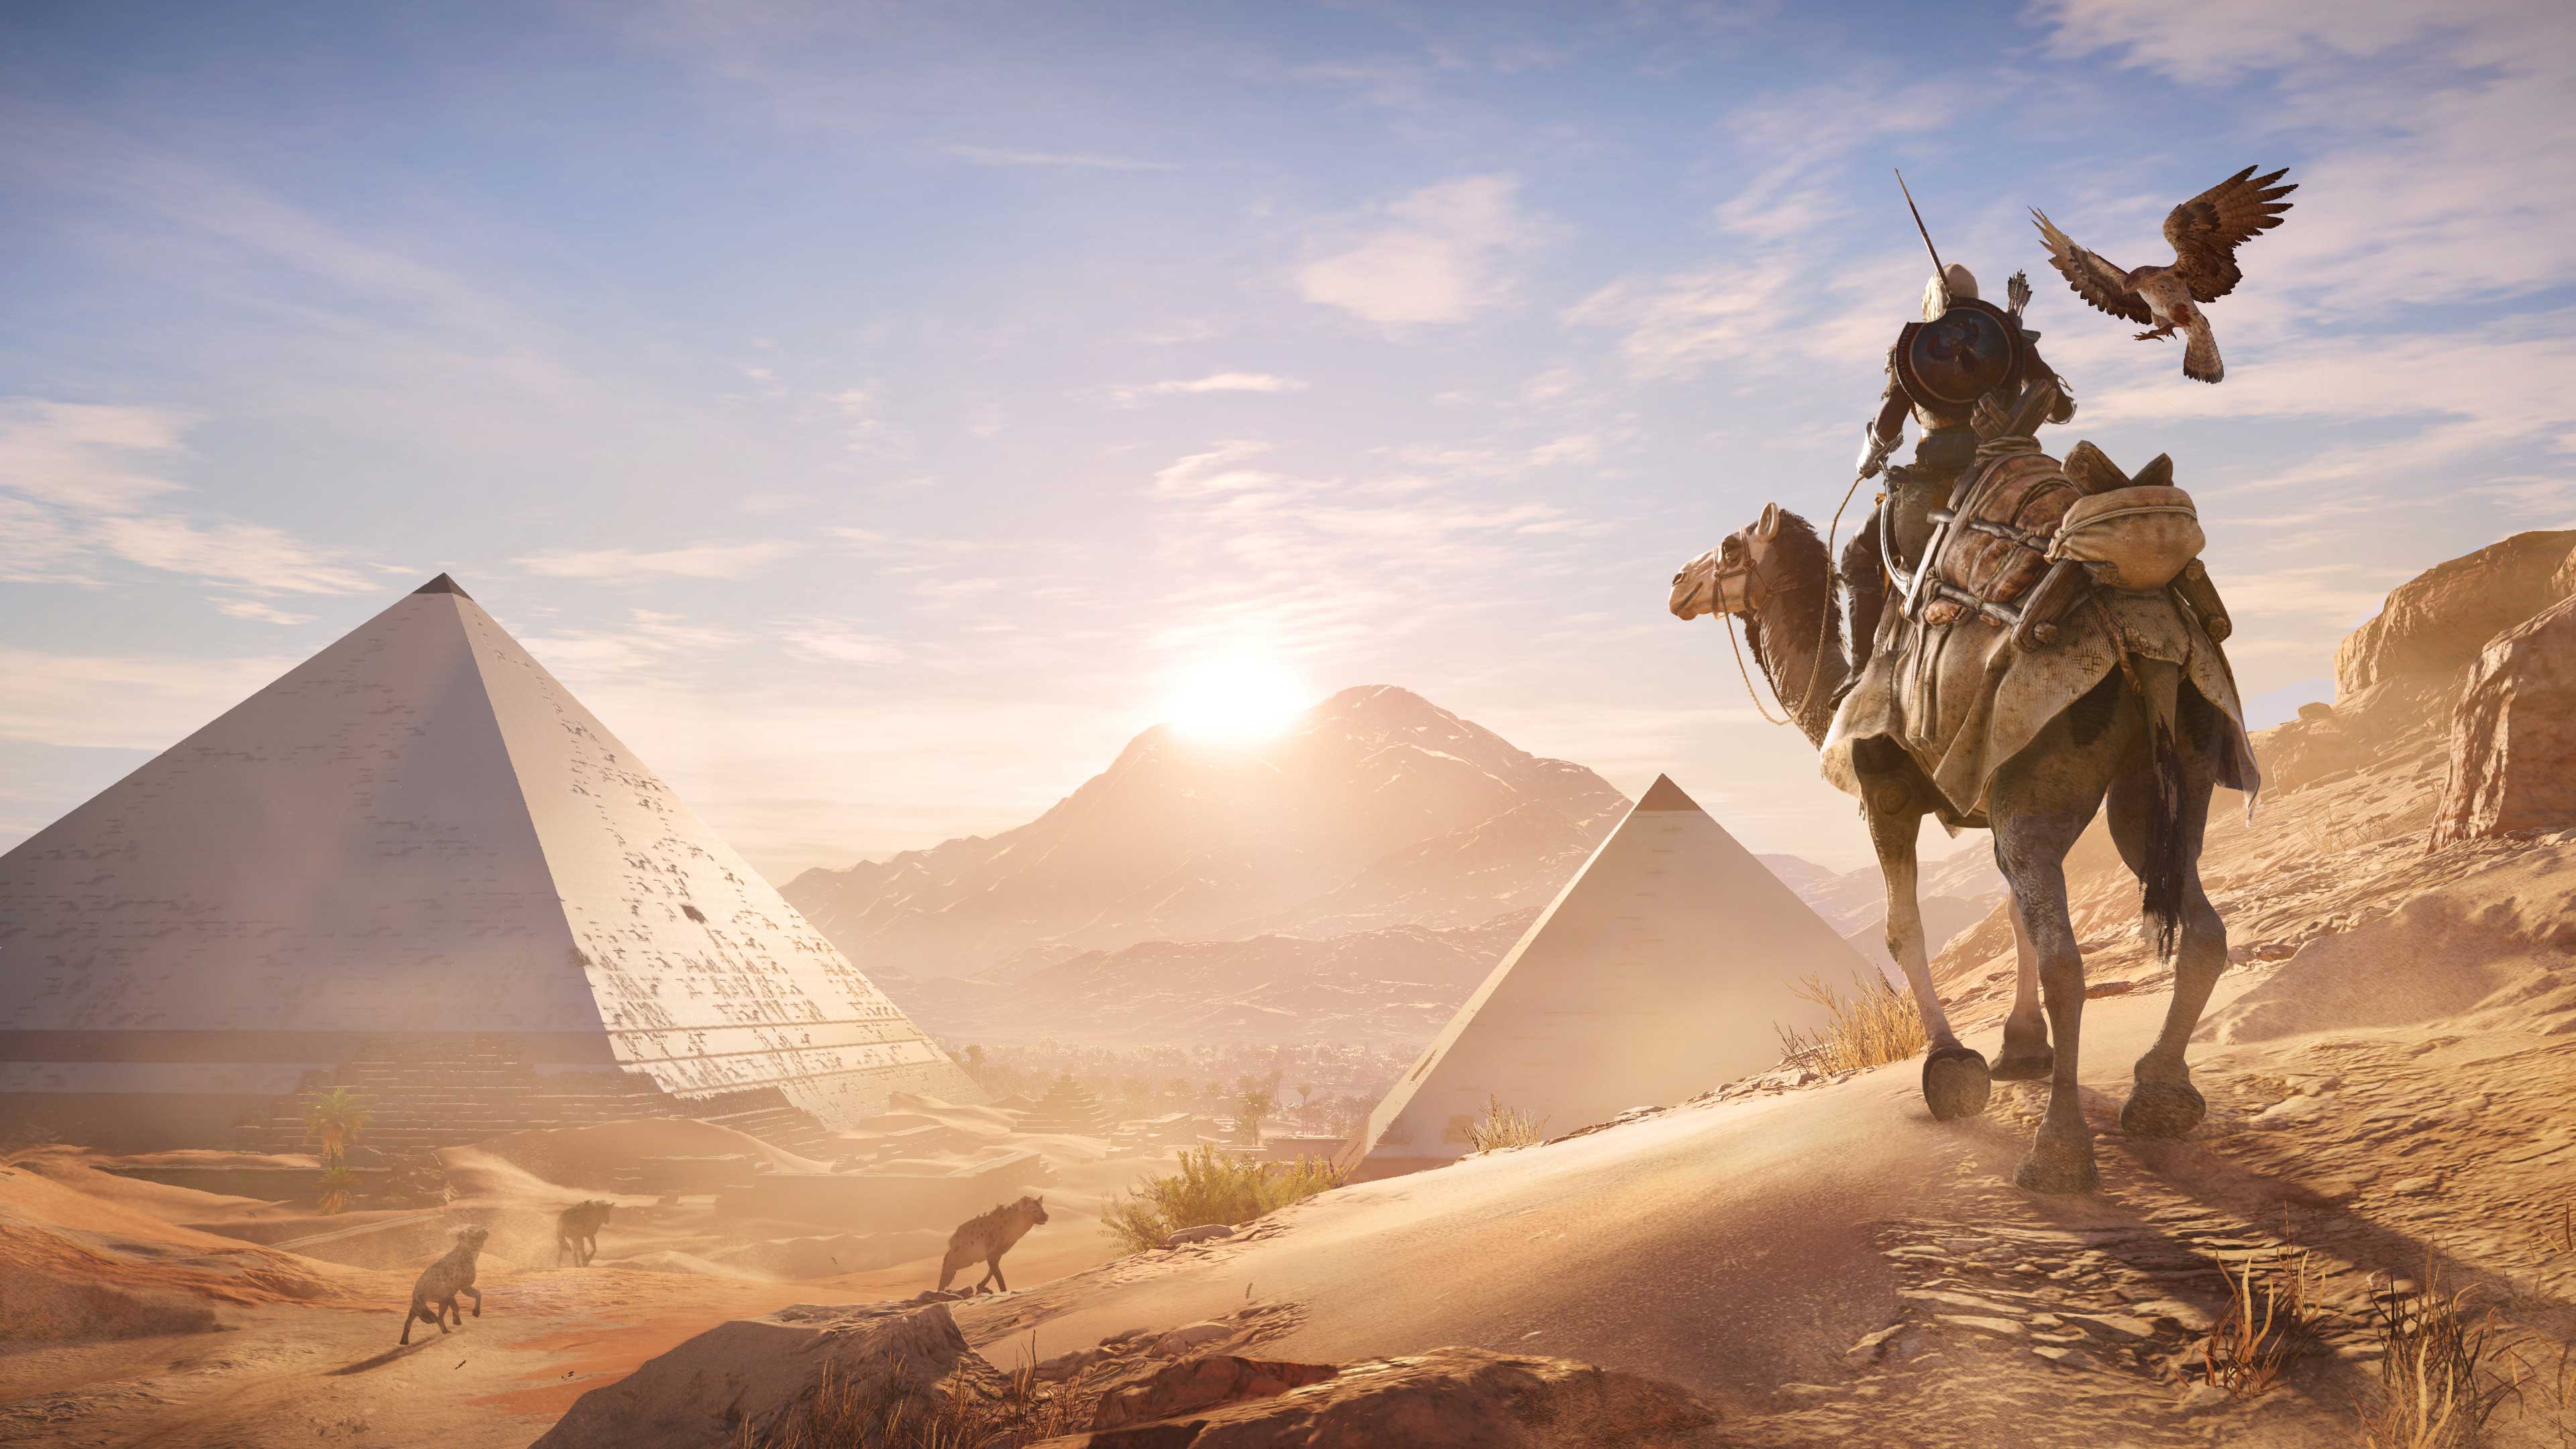 Long-awaited 60 FPS patch may be on the way for Assassin’s Creed Origins